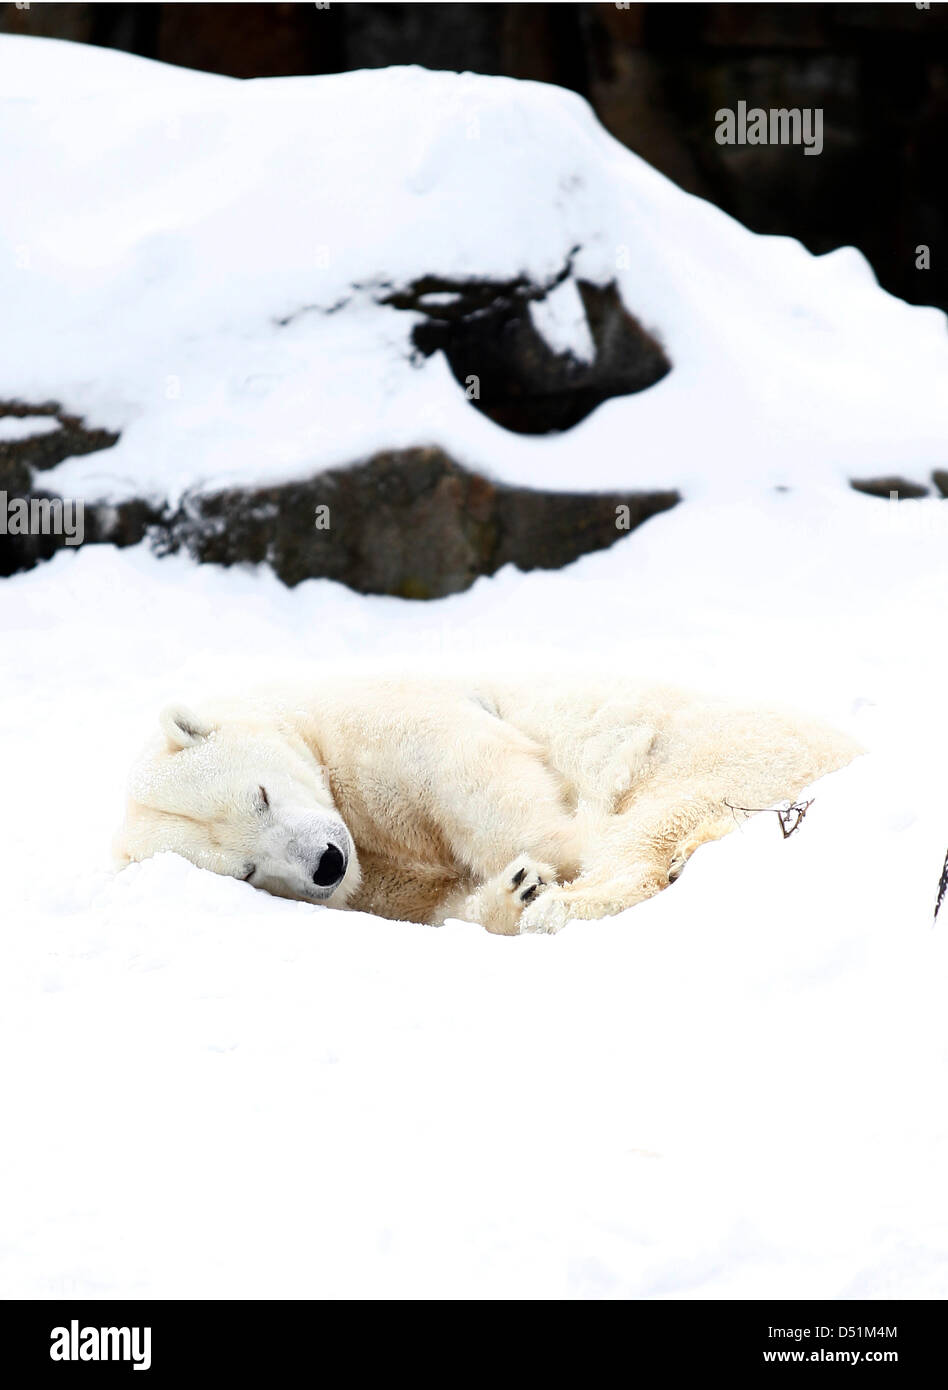 A polar bear takes a nap in the snow at the zoo in Berlin, Germany, 26 December 2010. Photo: Marcel Mettelsiefen Stock Photo